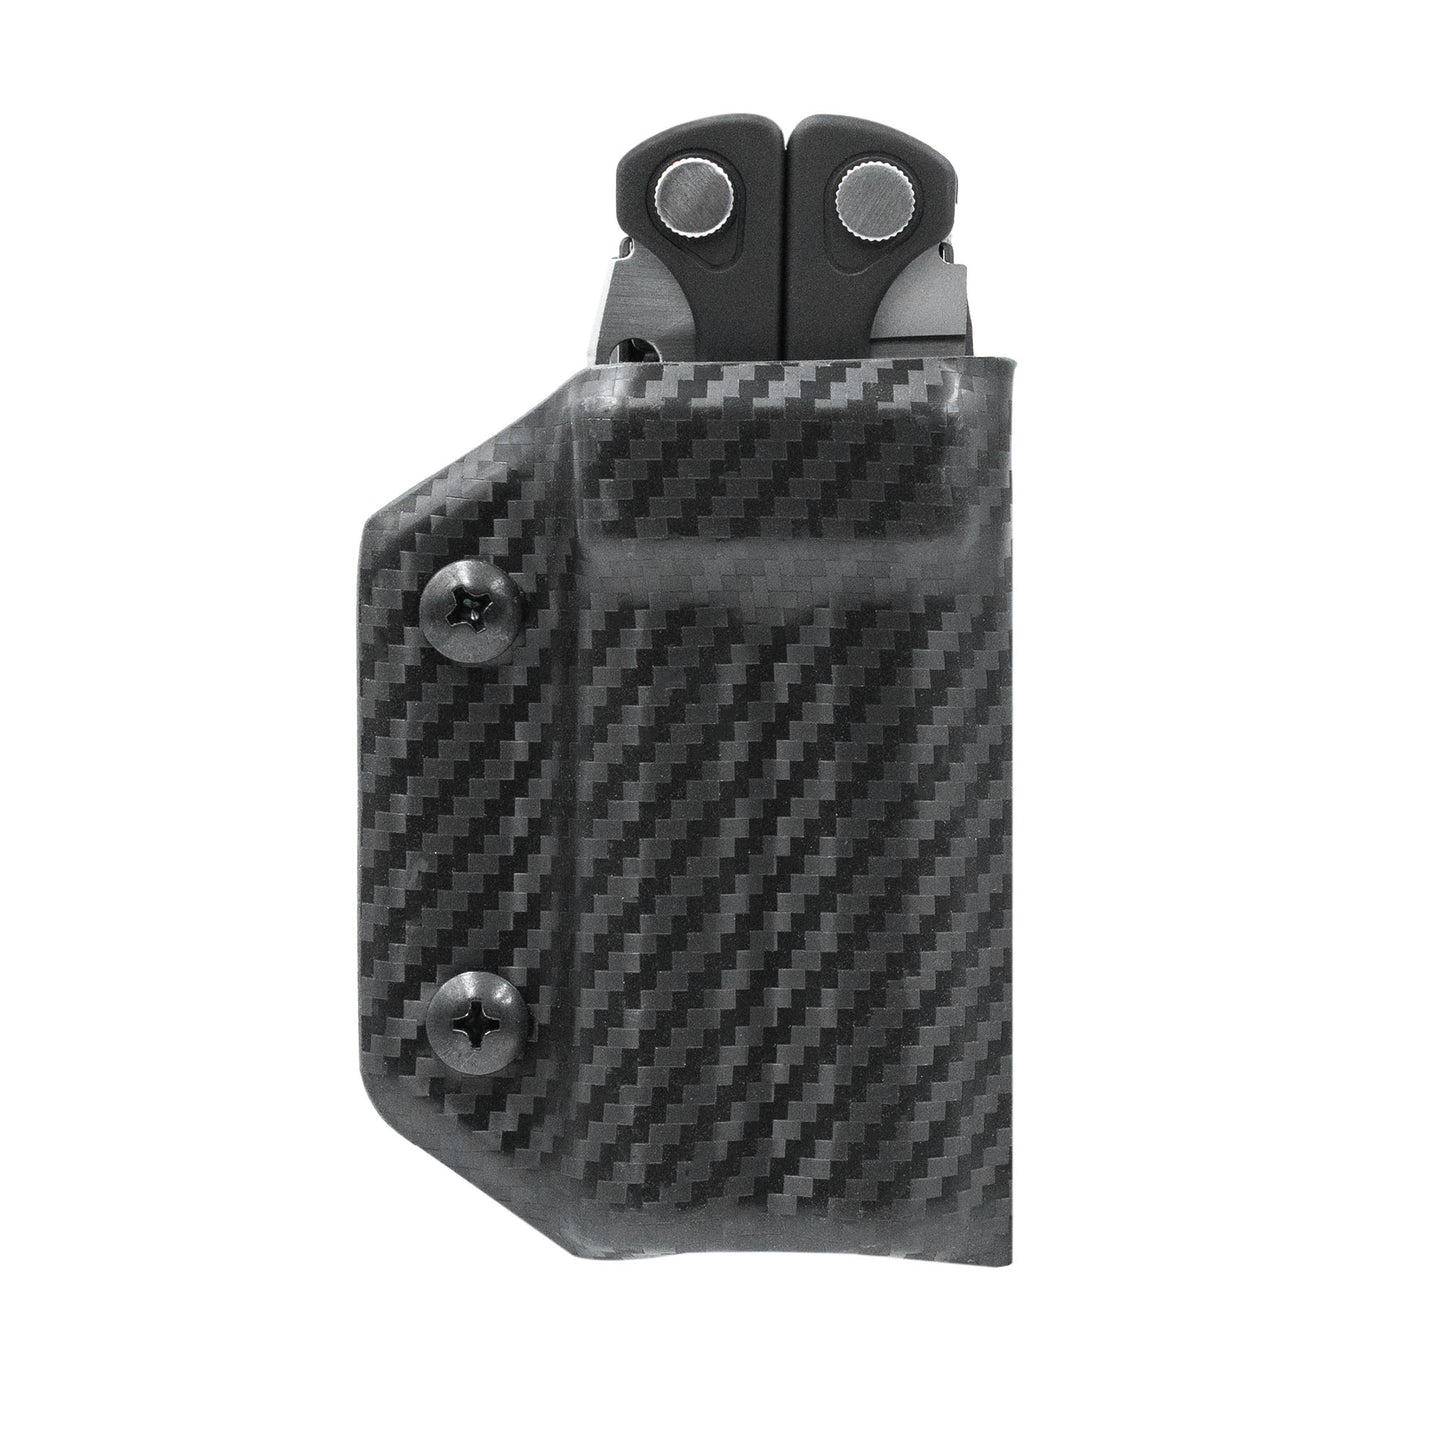 Kydex Sheath for Leatherman Charge & Charge + Clip & Carry